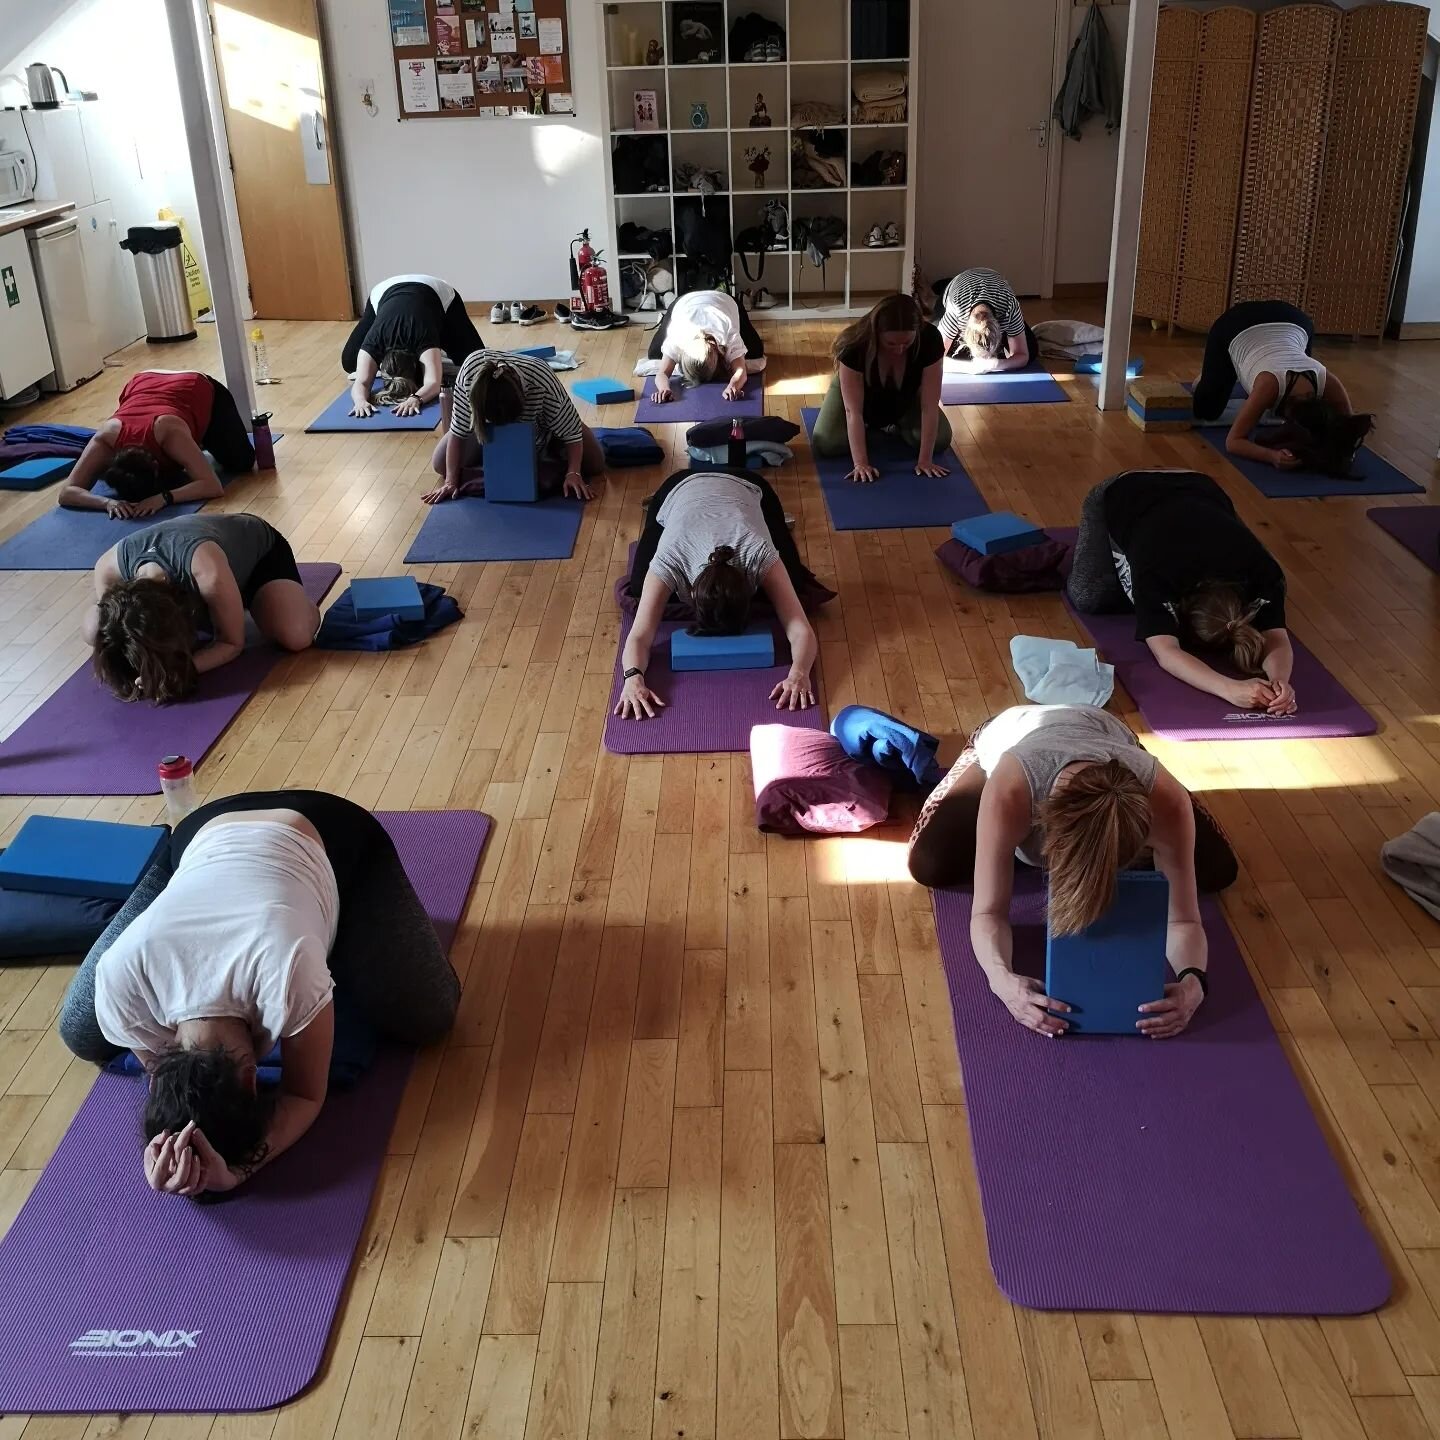 Pregnancy Yoga every Monday 5.45-7pm at The Loft above @littledippersltd.
Such a beautiful class tonight of 18 mamas 🧡 Gorgeous energy and focus from you all.
I love seeing people in my classes discover how simply moving their body, breathing techni